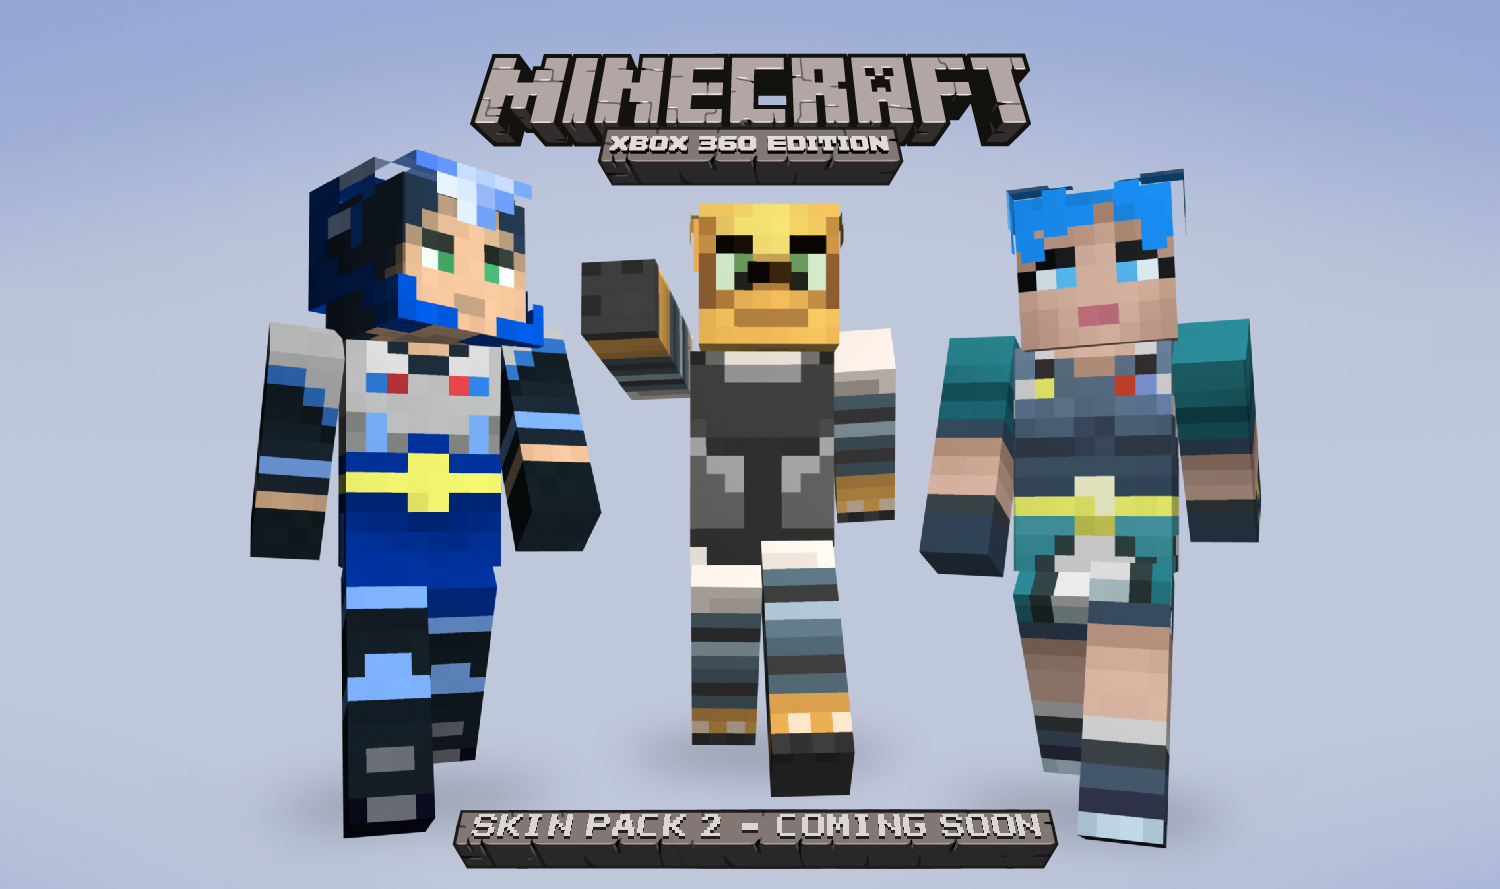 Jet Force Gemini Image Minecraft Skins HD Wallpaper And